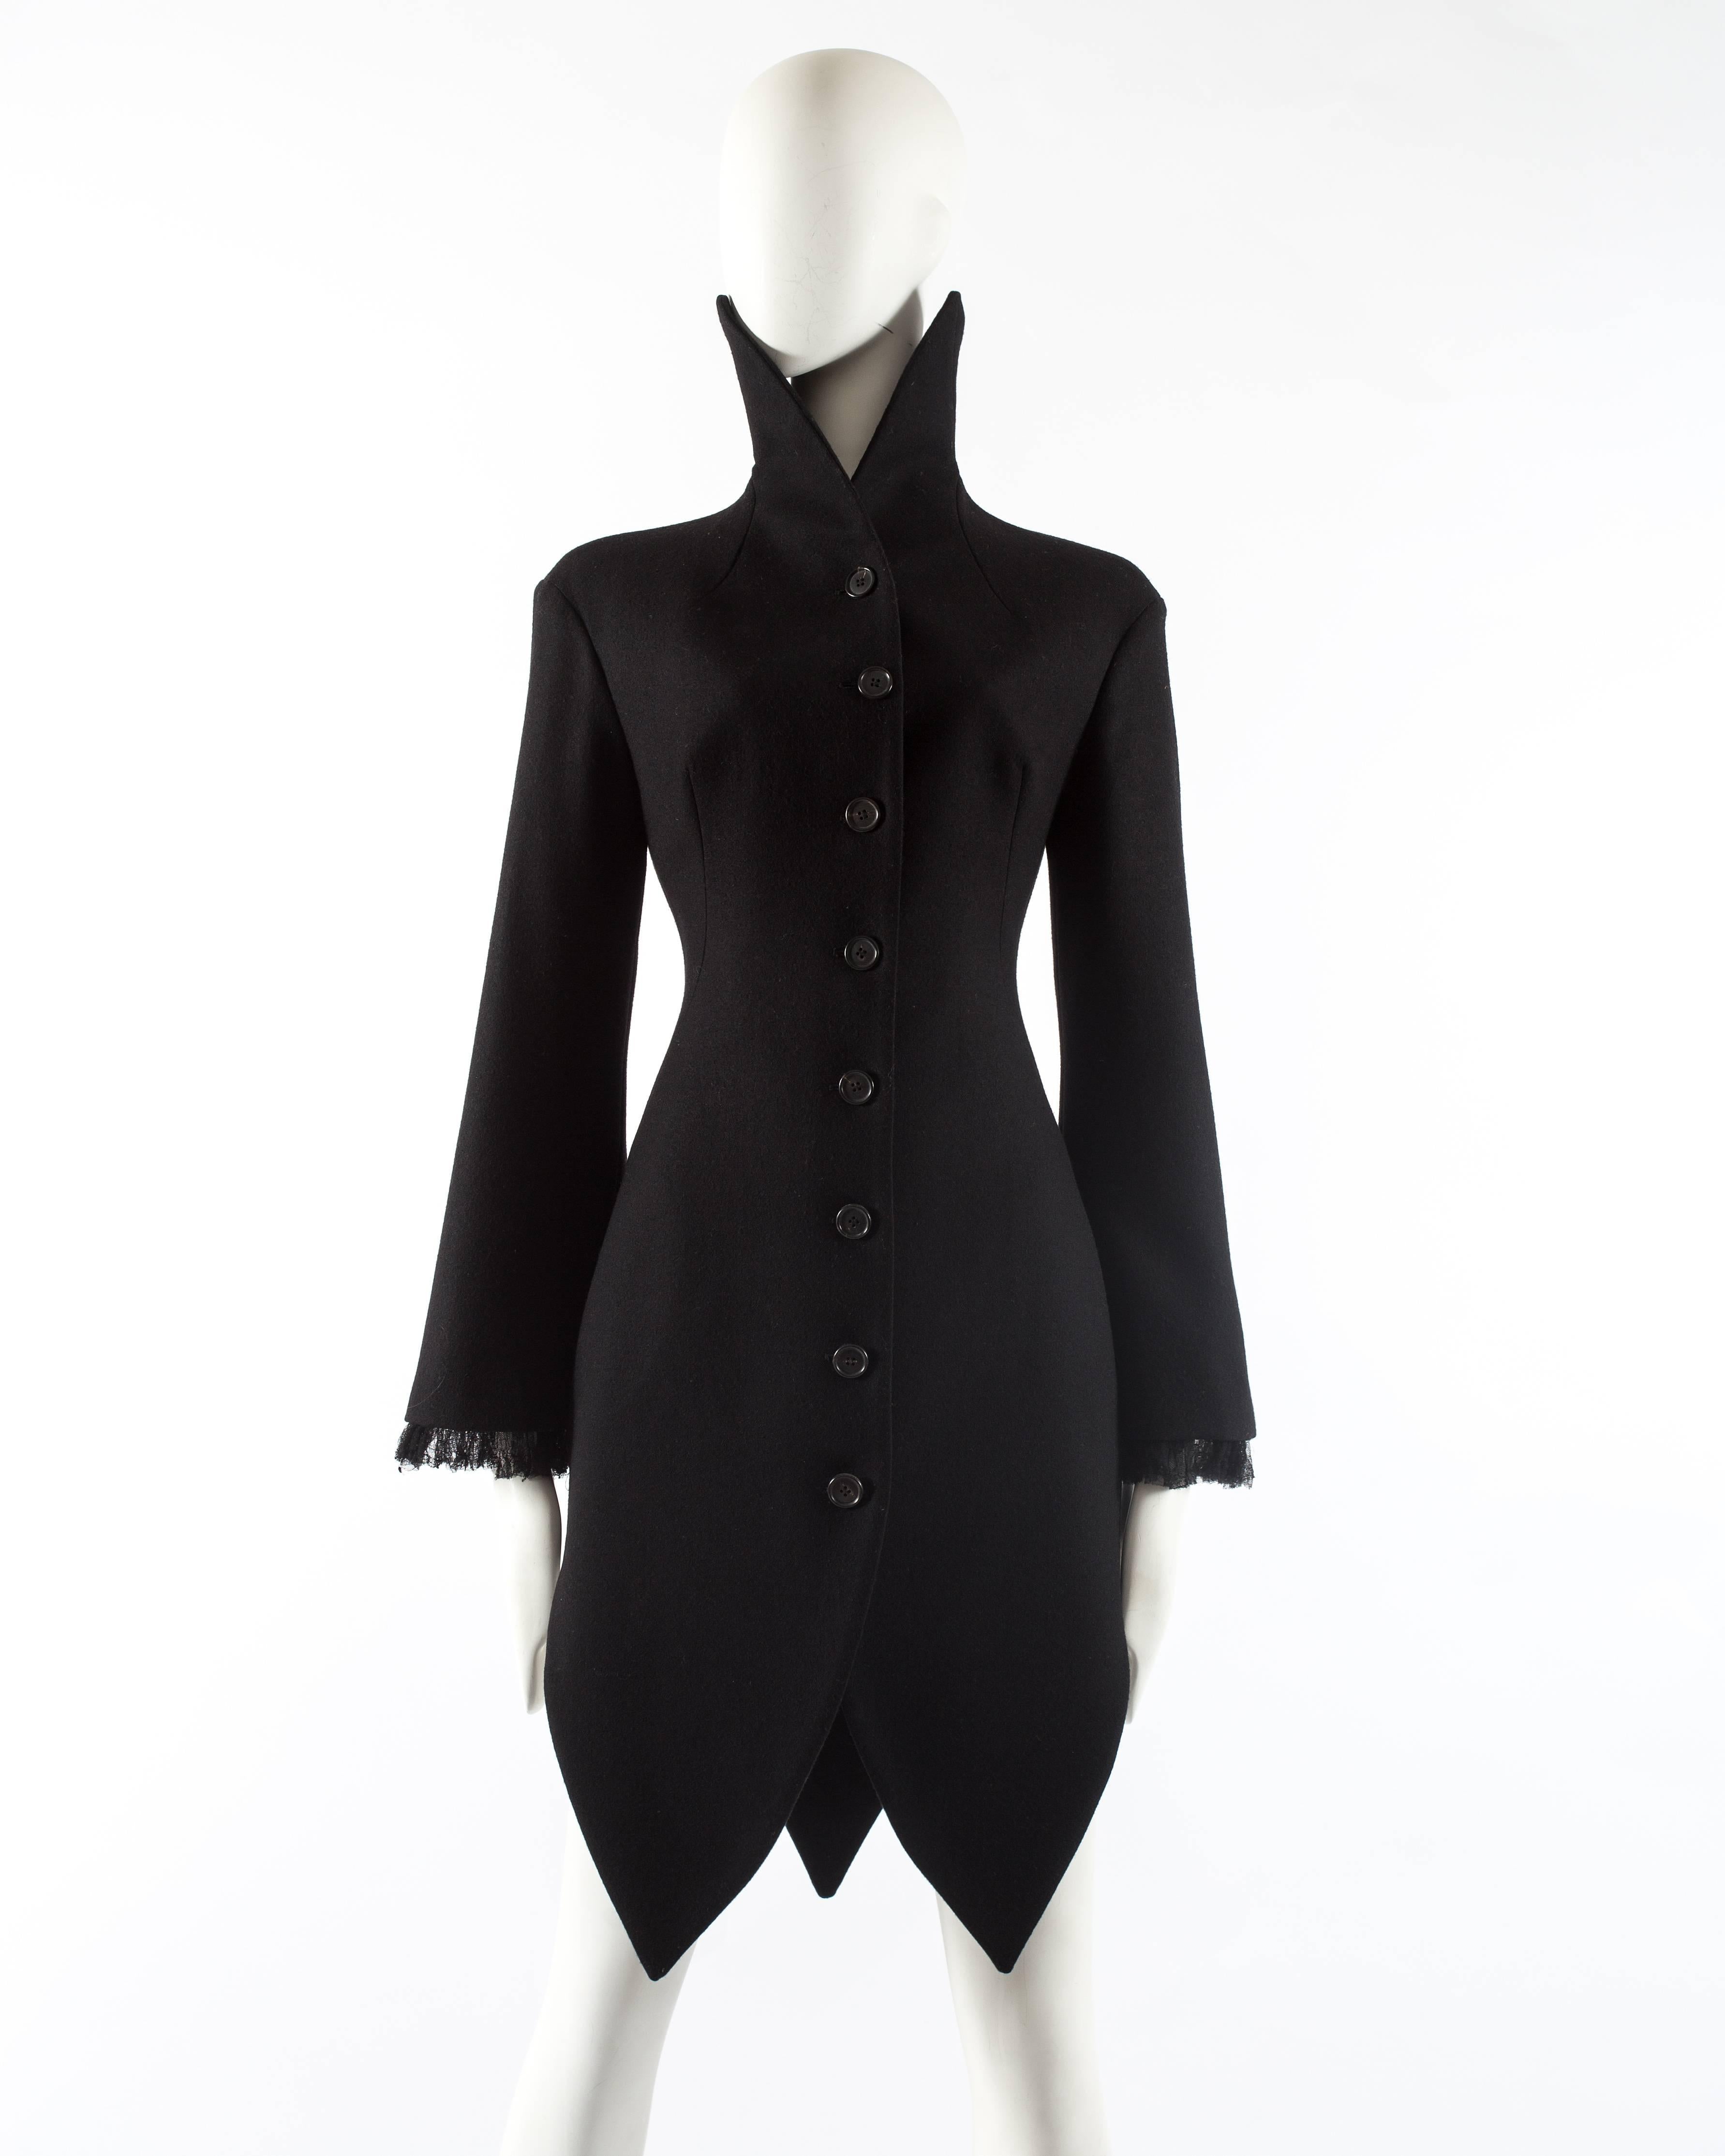 Introducing a striking Alexander McQueen black wool evening coat from the autumn-winter 2008 collection. This coat embodies the designer's exceptional craftsmanship and innovative design.

With its eight-button closure at the front, the coat exudes